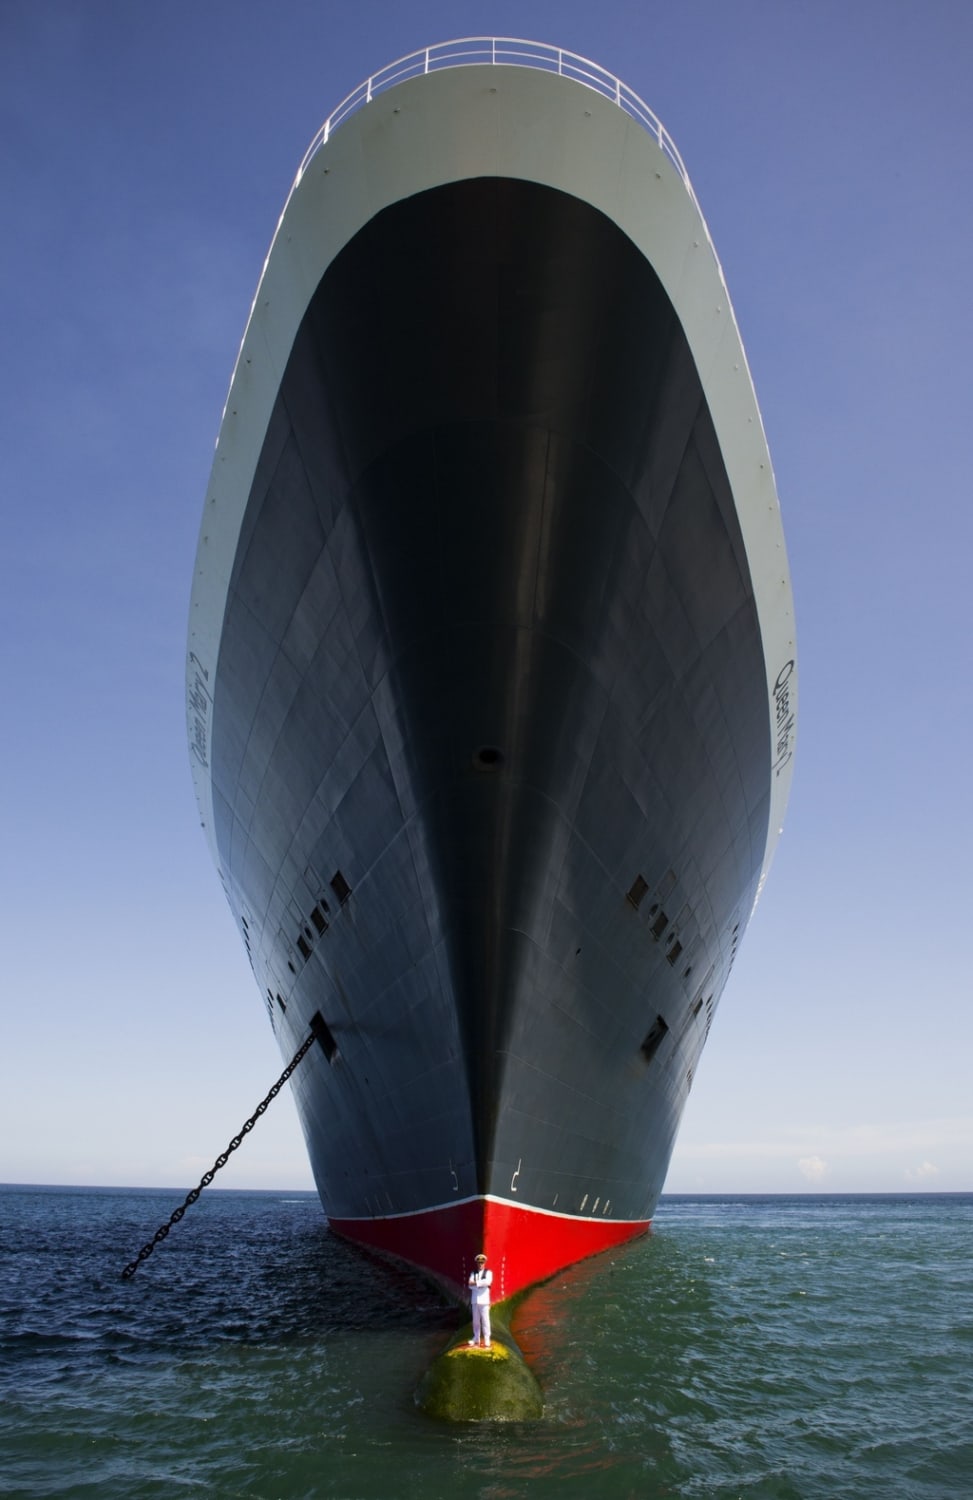 Cunard celebrated the 10th anniversary of the Queen Mary 2 by putting the captain on the bulbous bow.